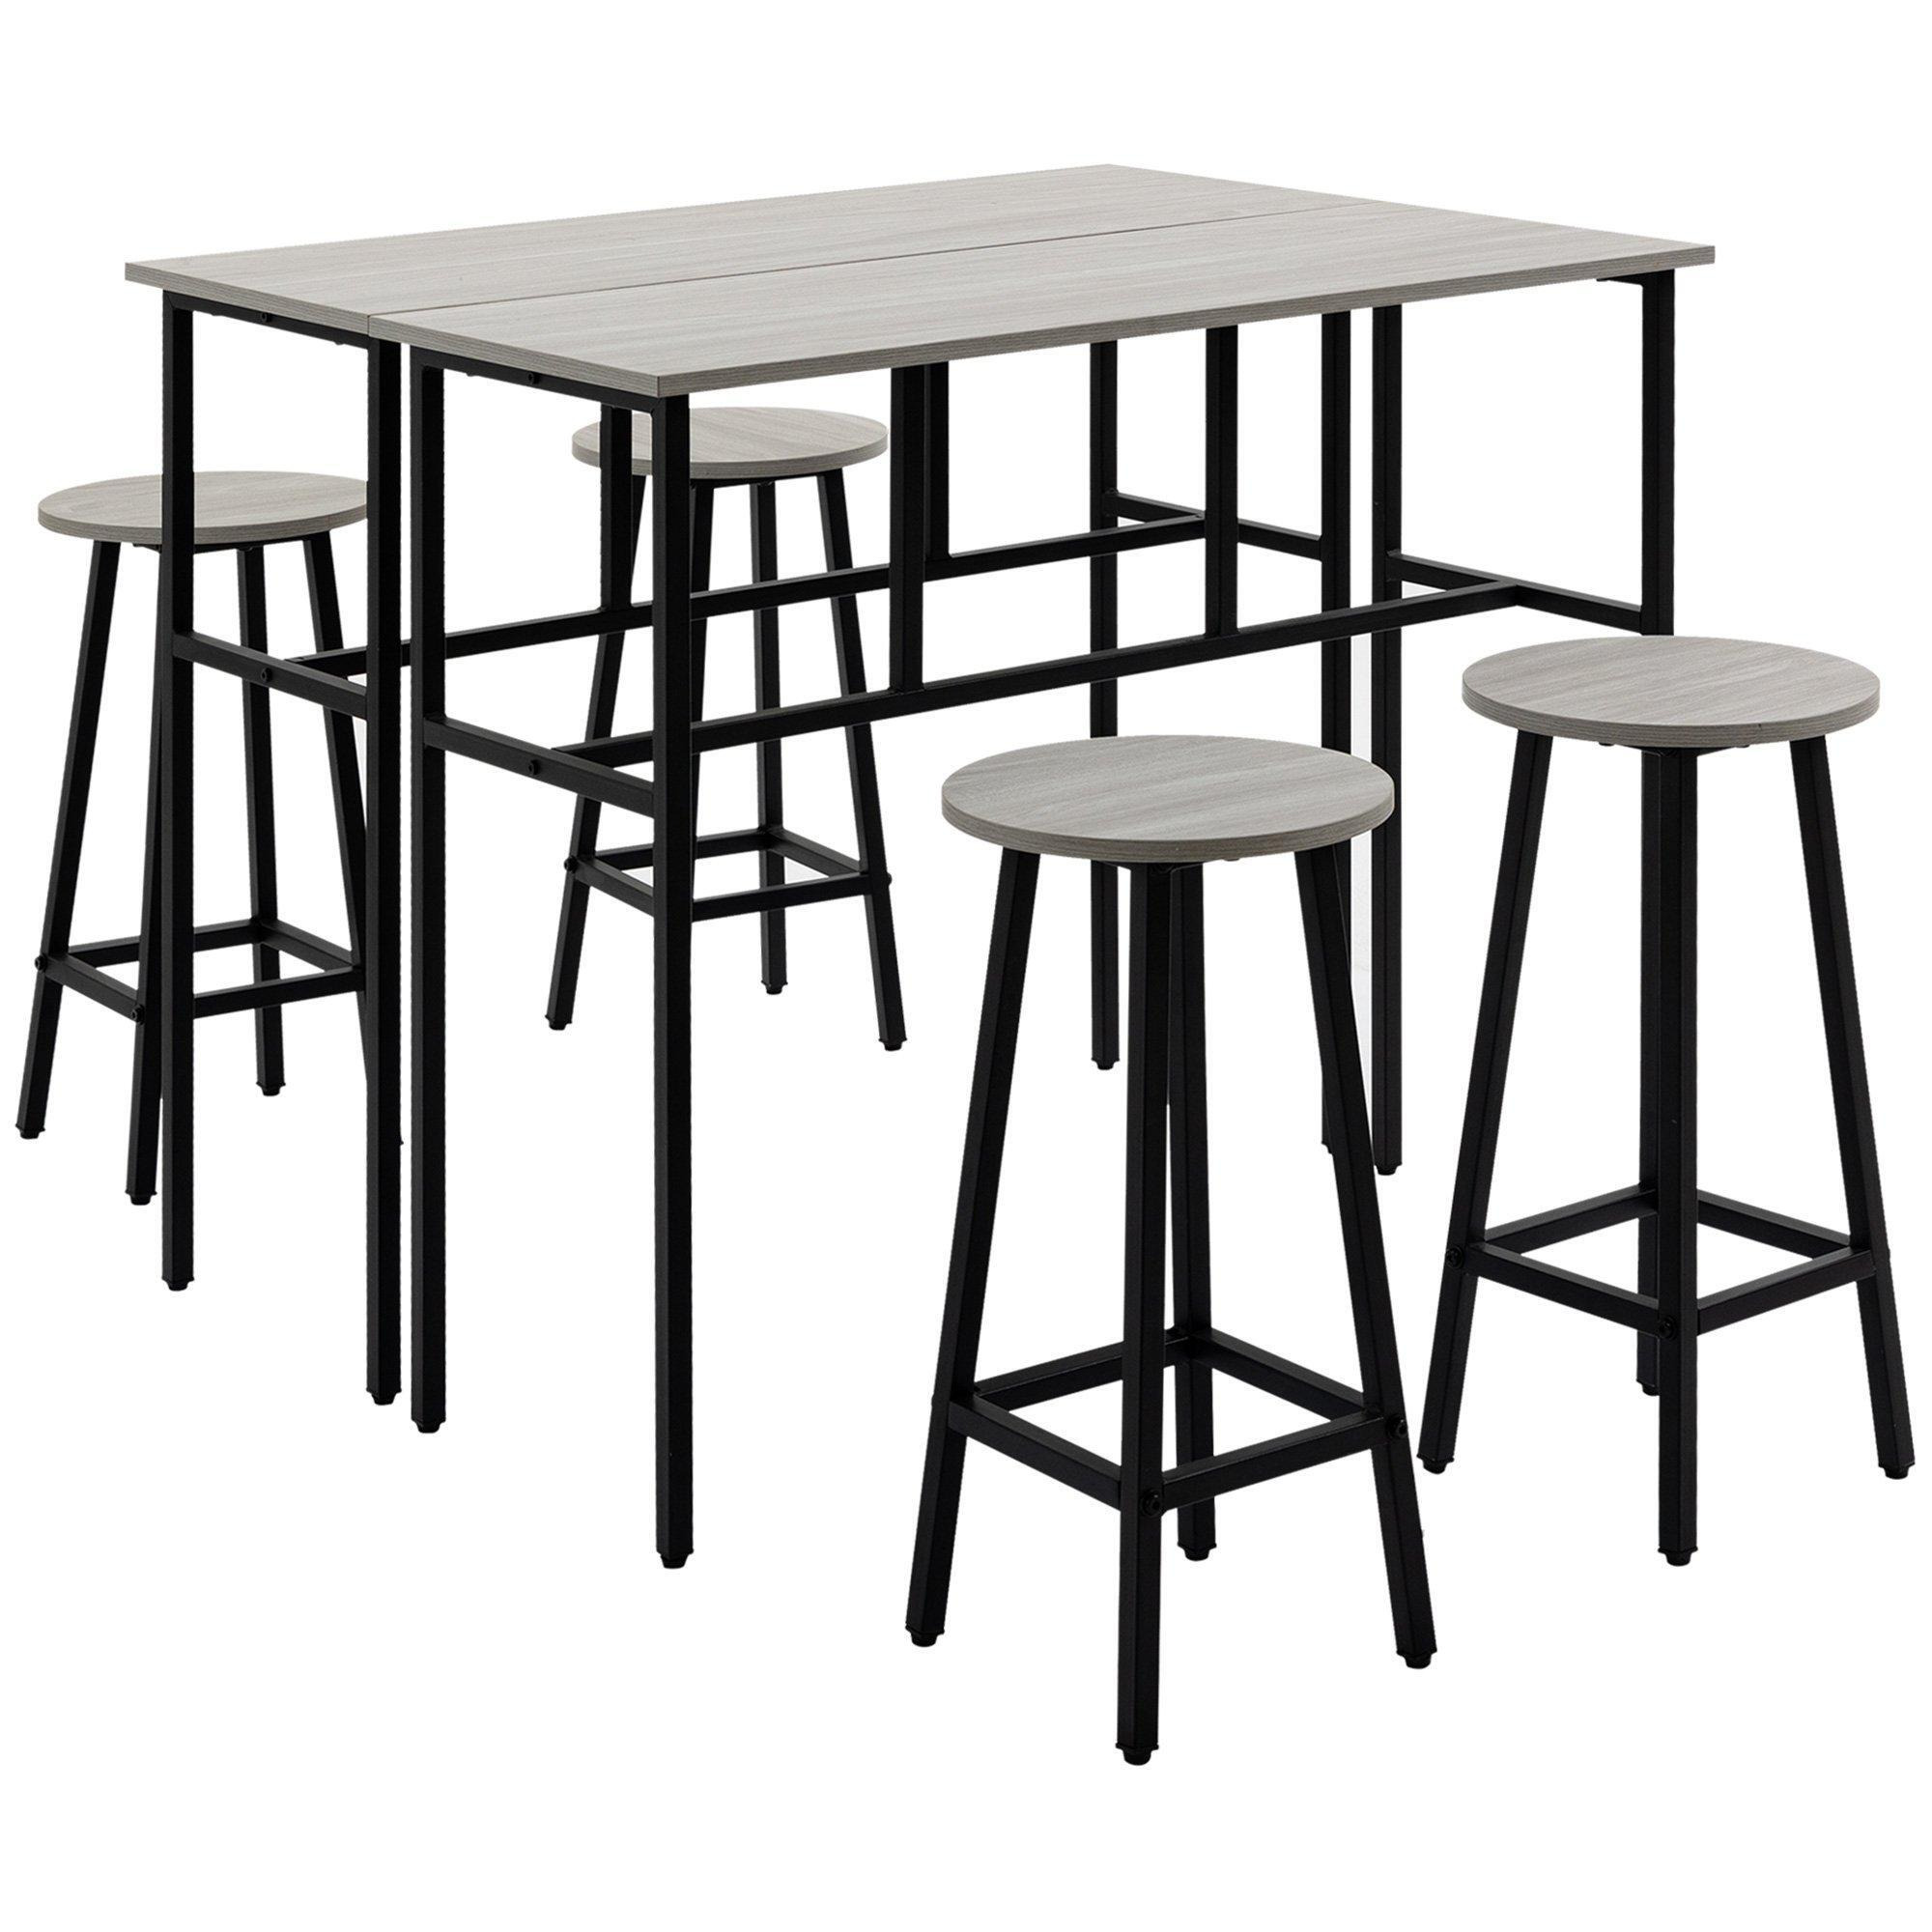 6 Piece Industrial Bar Table Set 2 Breakfast Tables with 4 Stools - image 1